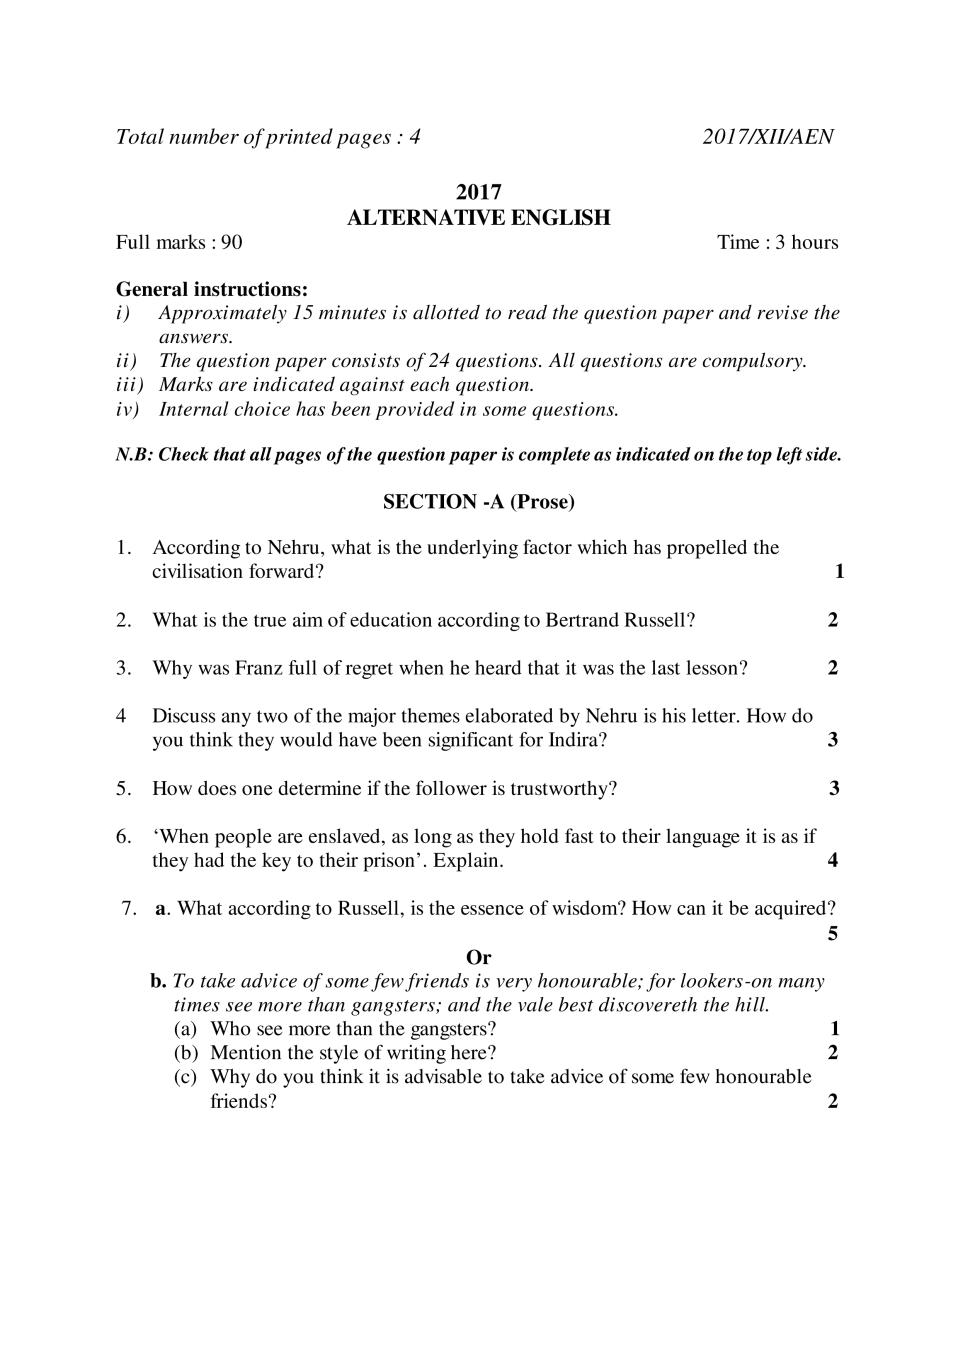 NBSE Class 12 Question Paper 2017 for Alternative English - Page 1